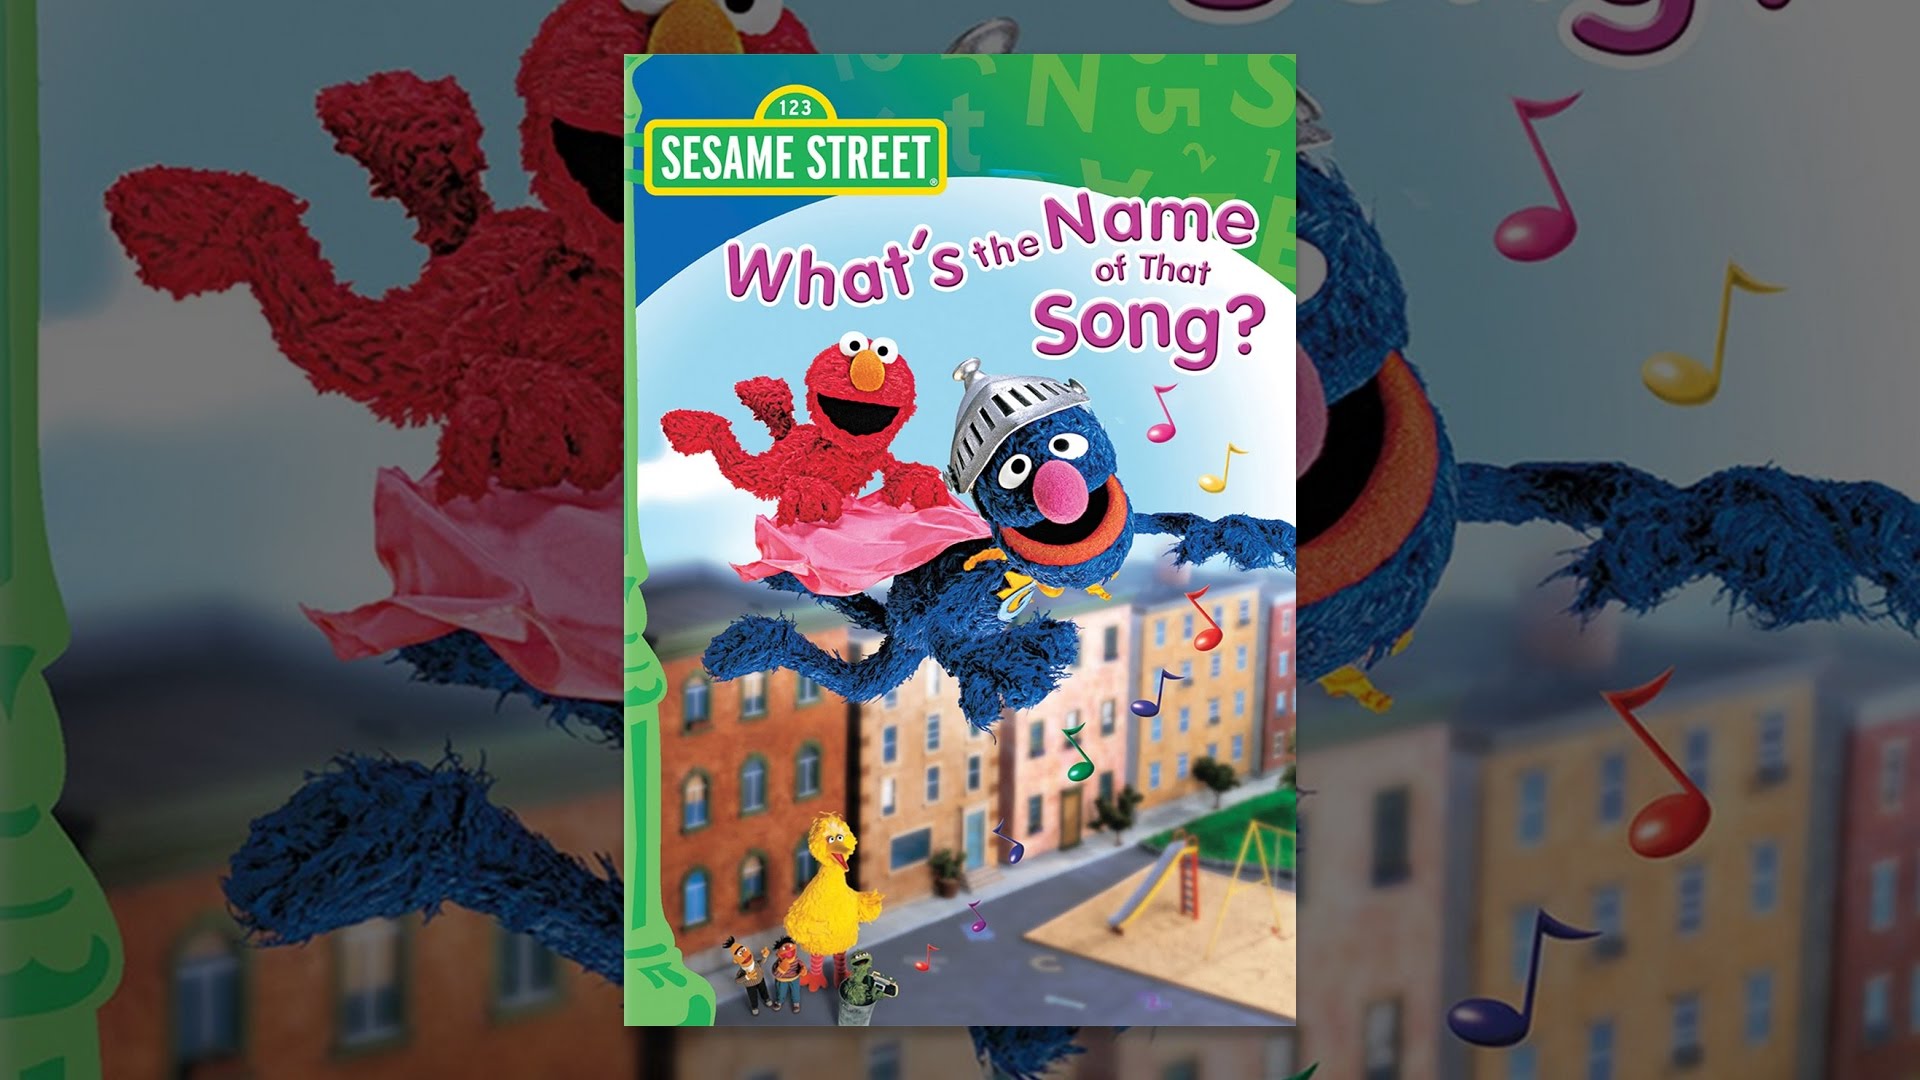  Sesame Street: What's the Name of That Song?